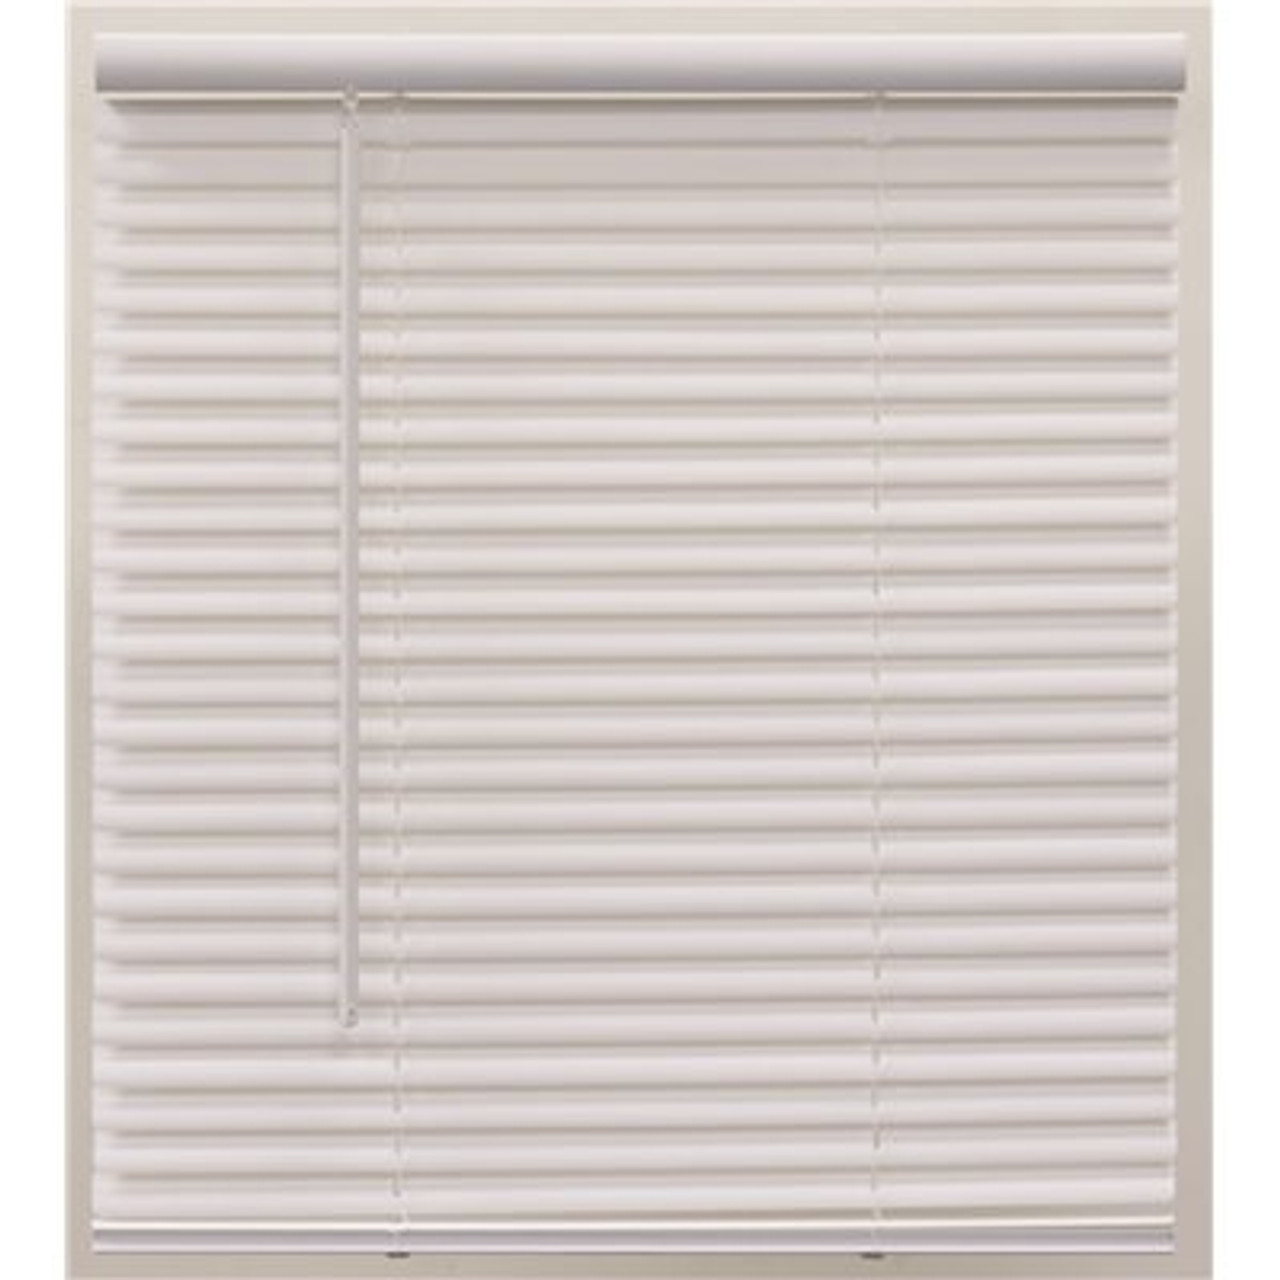 Champion Pre-Cut 50 in. W x 64 in. L White Cordless Light Filtering Vinyl Mini Blind with 1 in. Slats